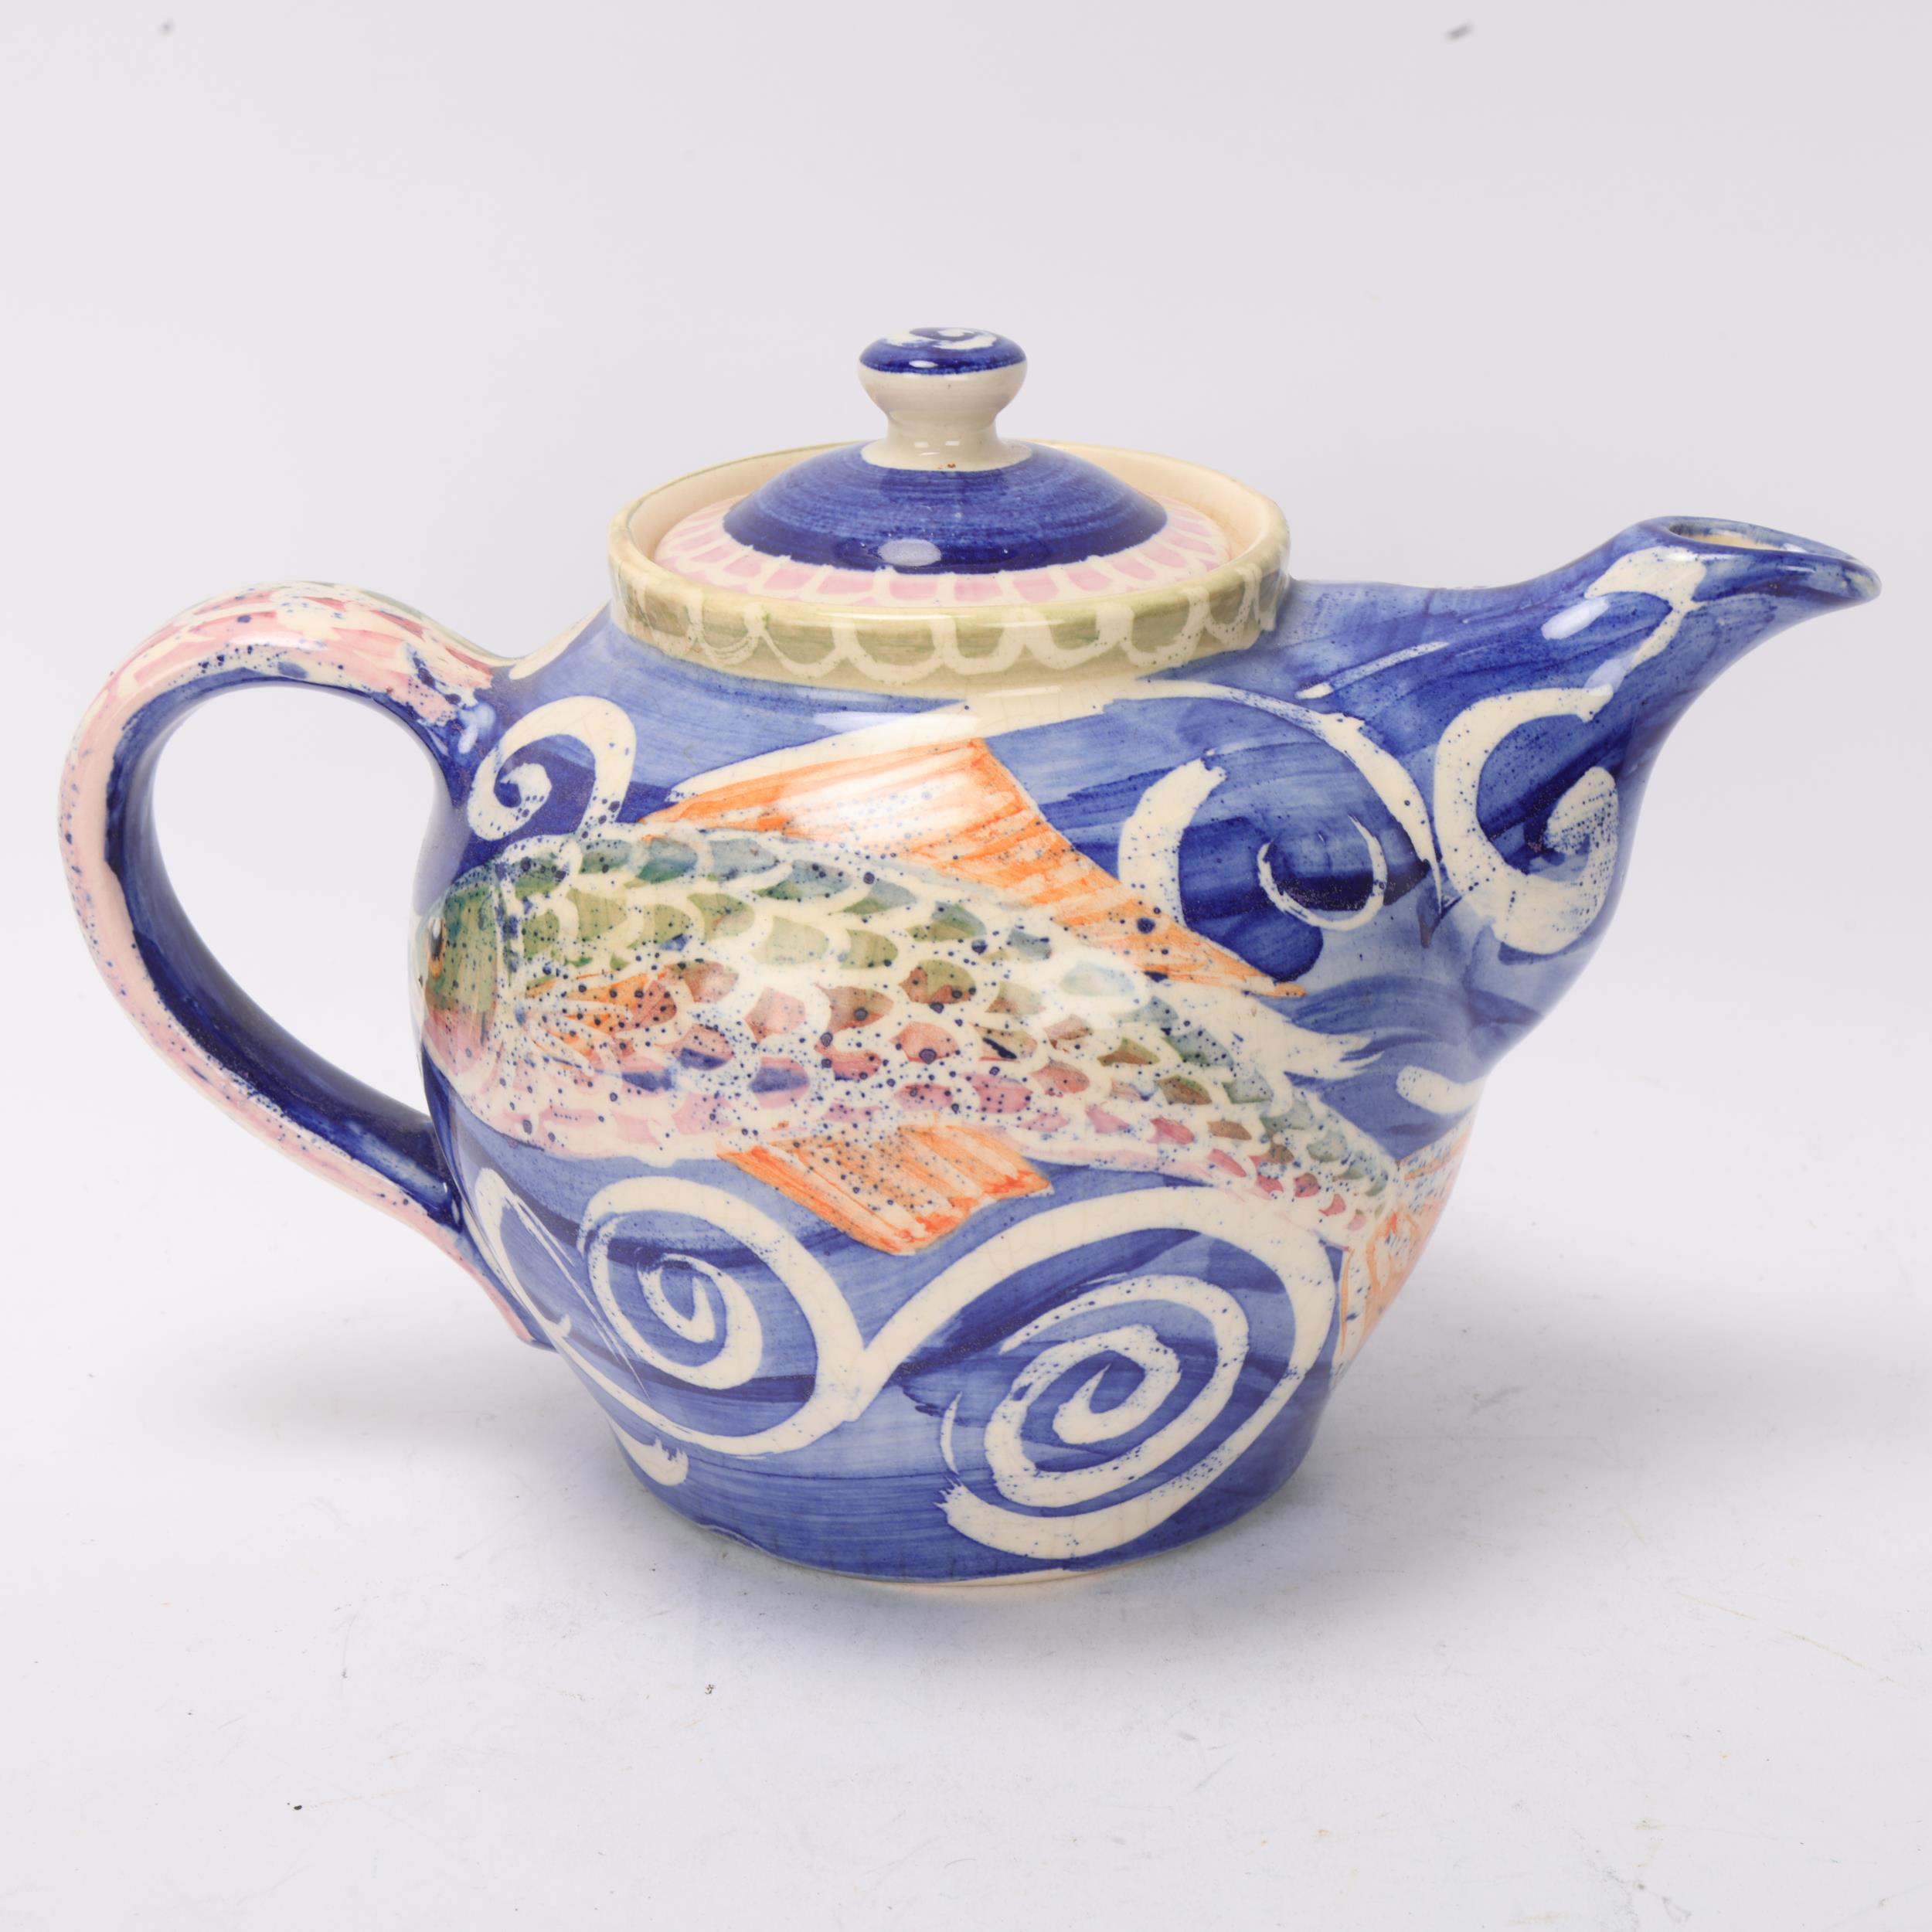 An Iden, East Sussex Delftware teapot, hand painted Mermaid and fish glaze, makers mark and signed - Image 2 of 3